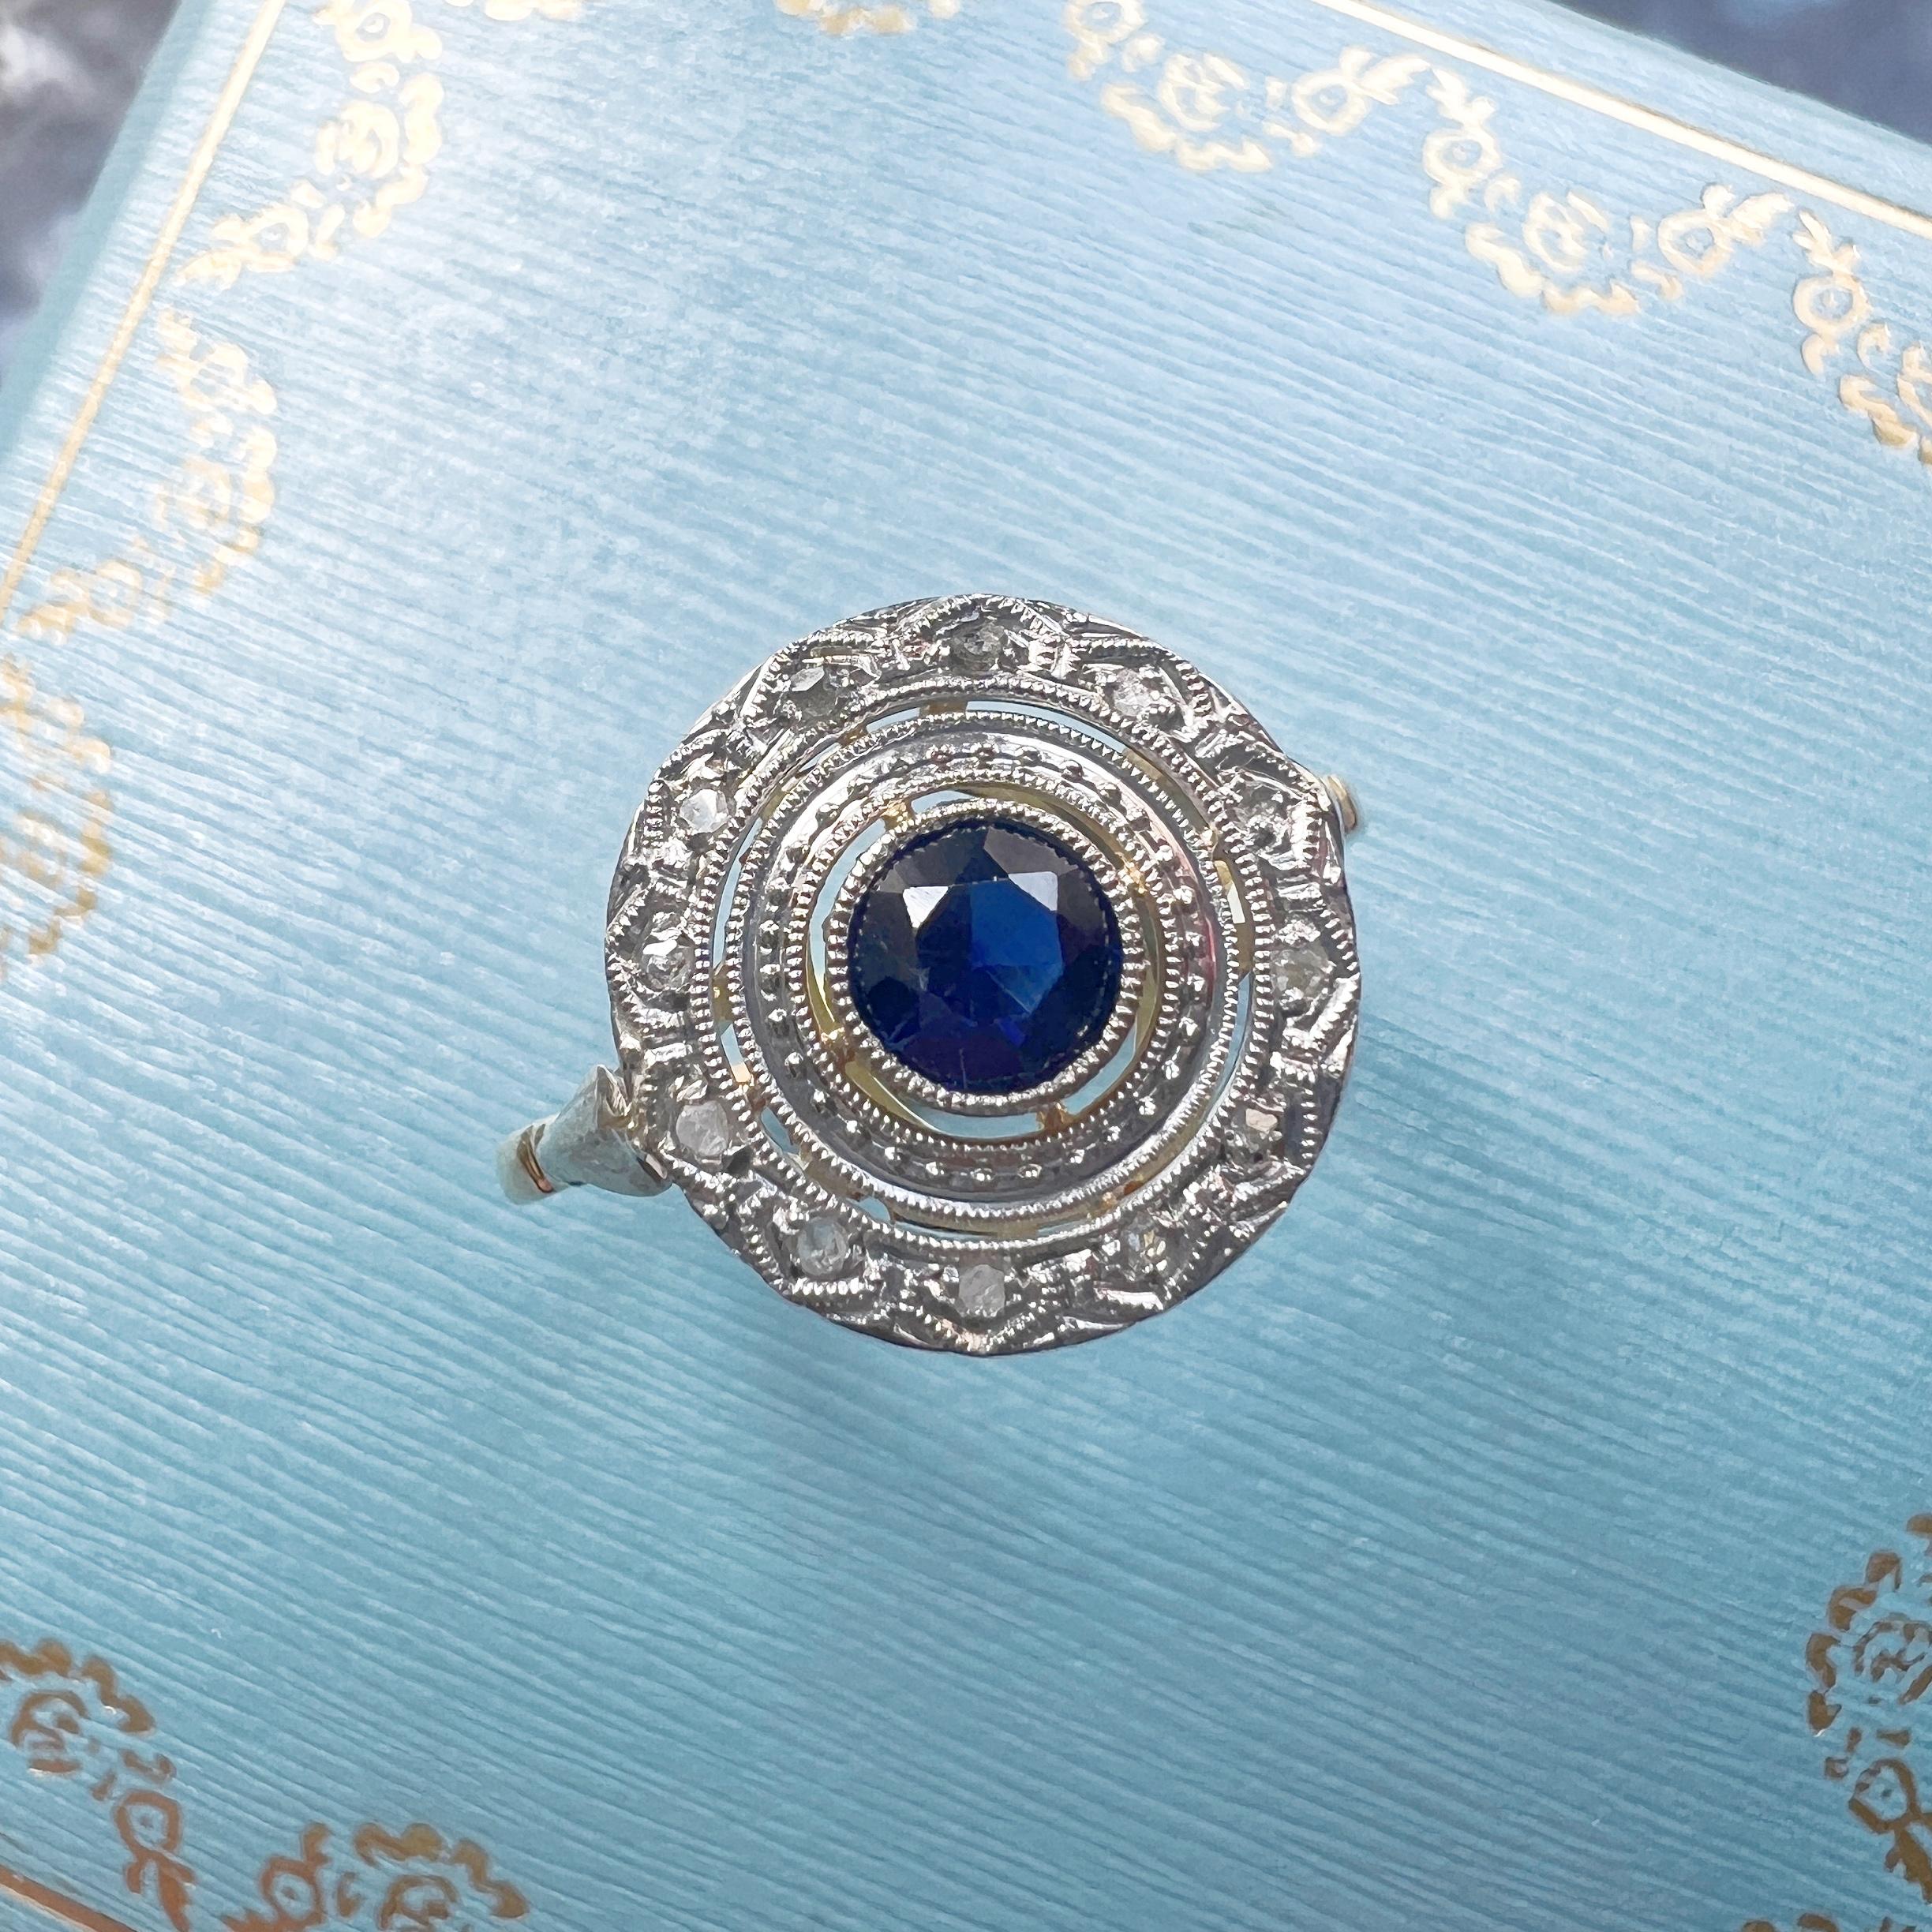 For sale an antique ring, crafted during the late 19th to early 20th century. This captivating piece showcases a stunning blue sapphire, encircled by a halo of rose cut diamonds, creating a mesmerizing cluster design.

At the center of this